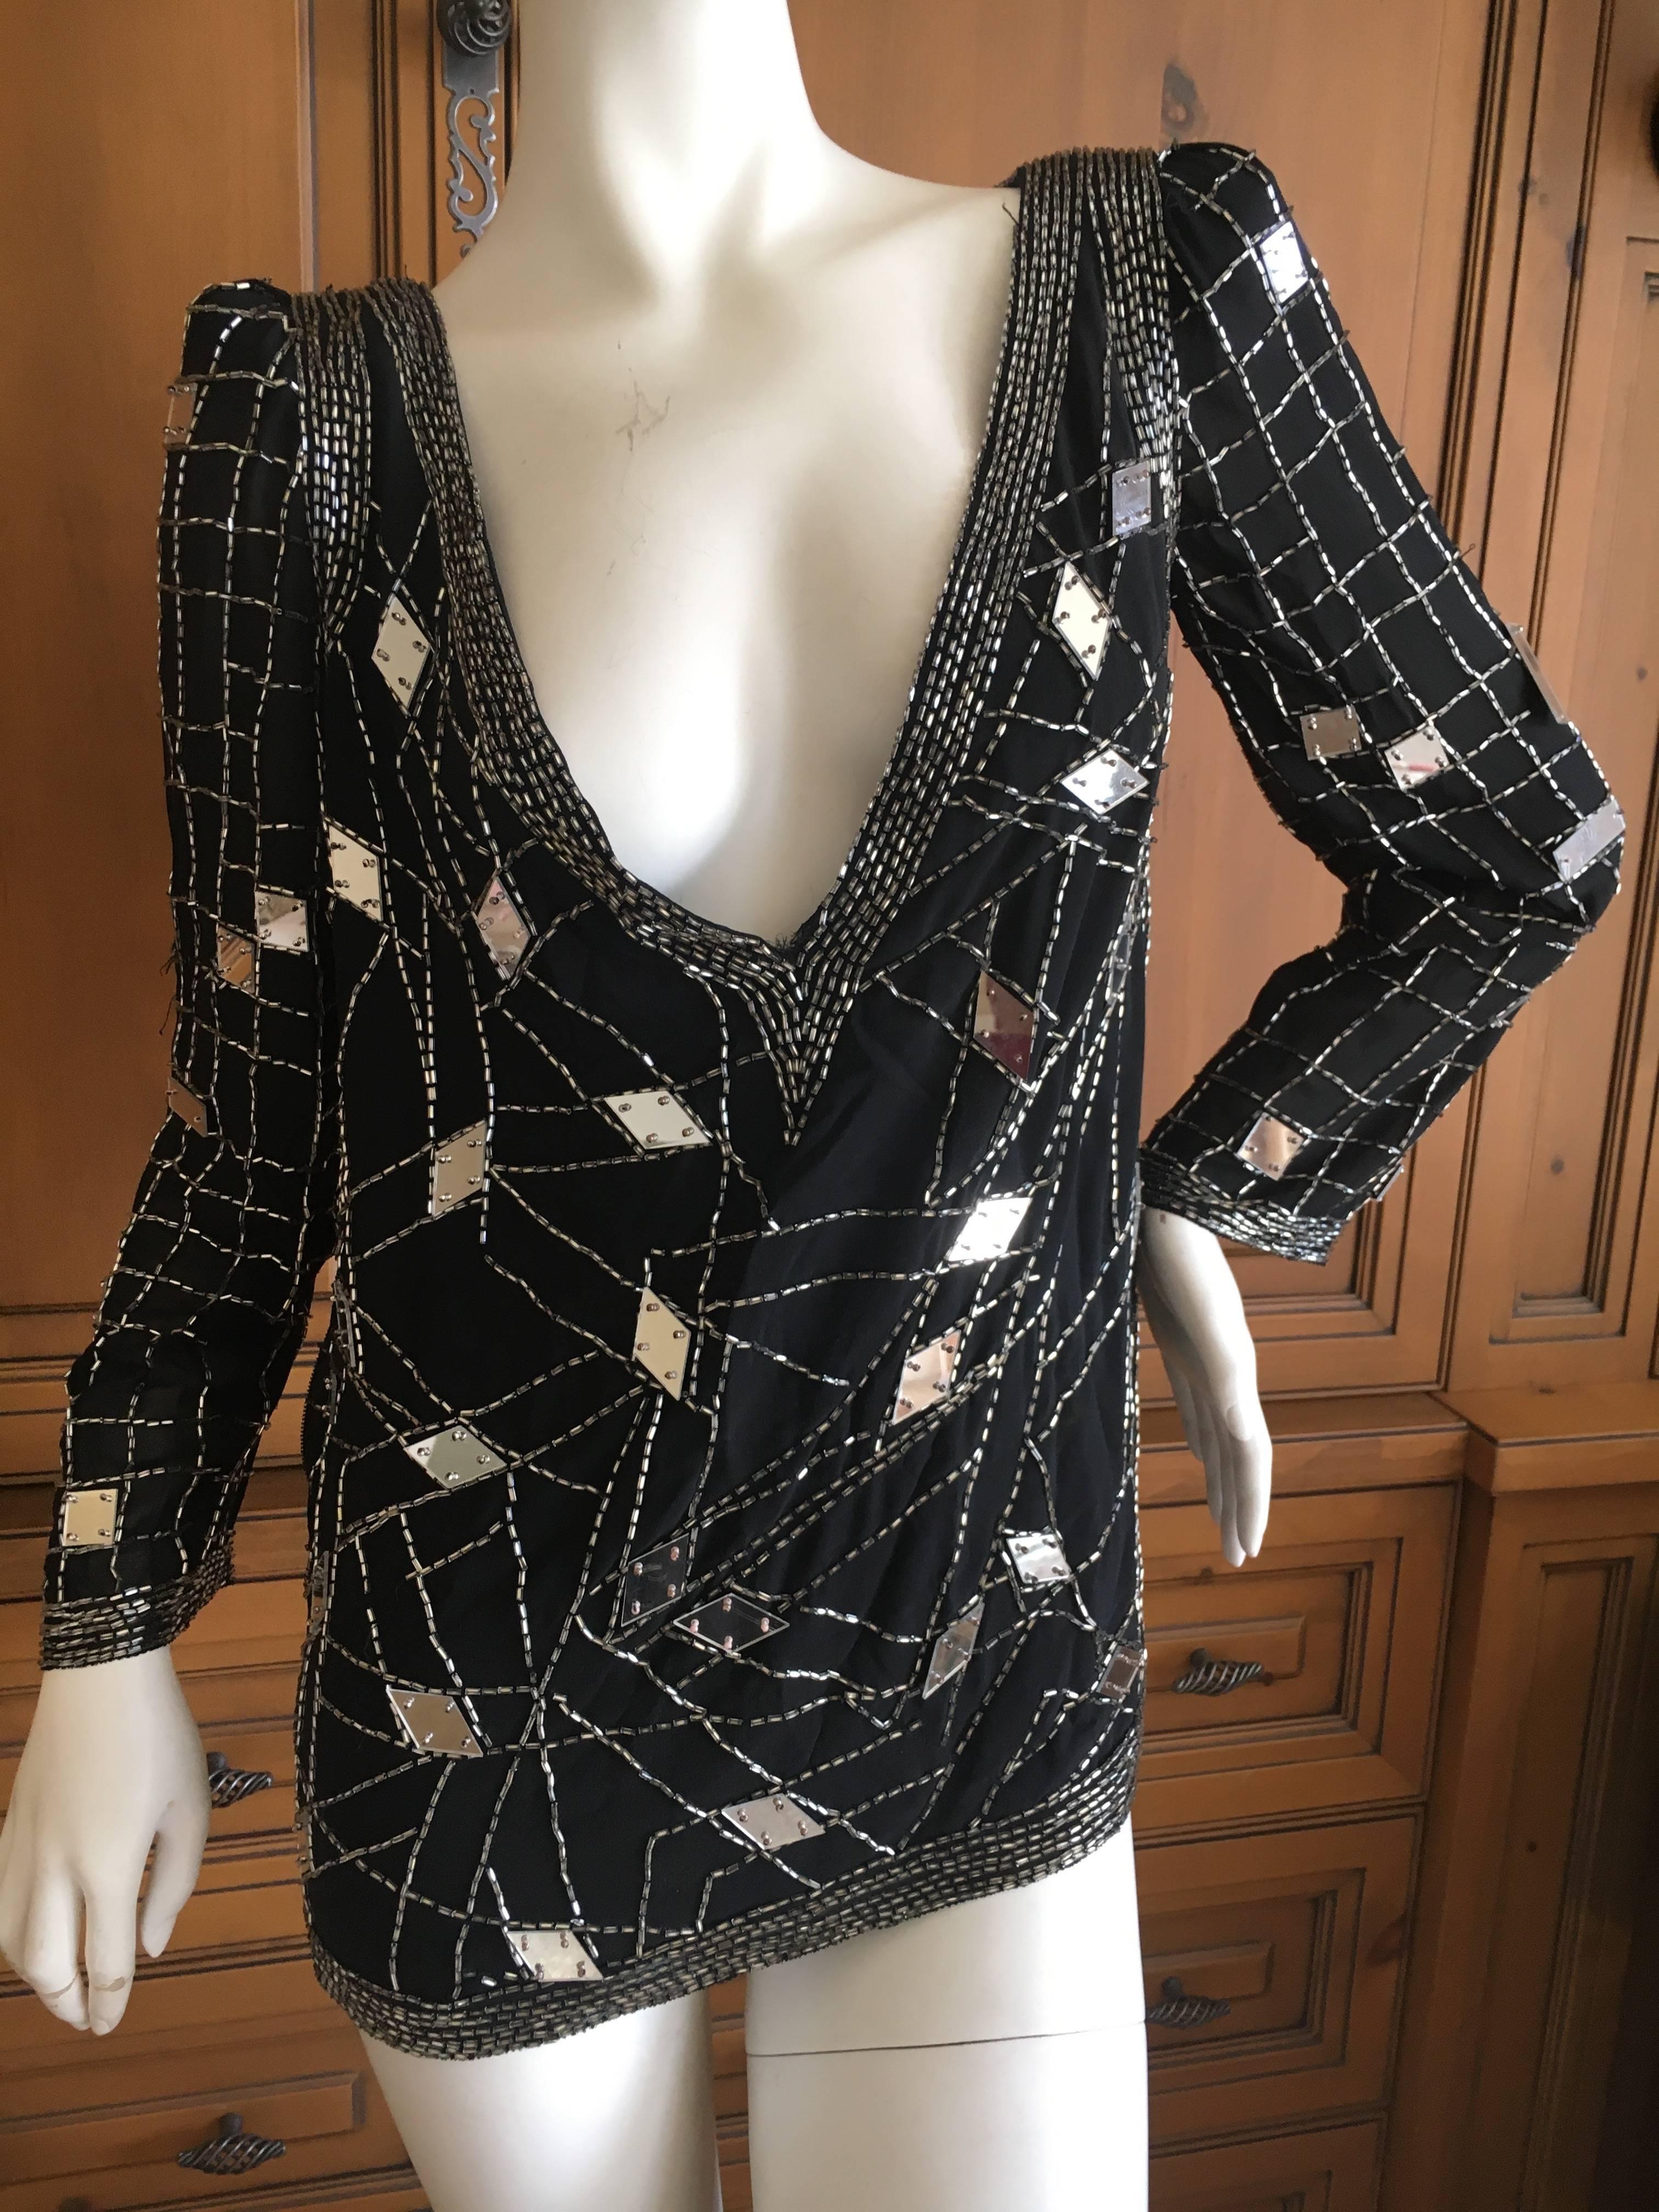 Fabrice for Amen Wardy 1980's Low Cut DIsco Era Beaded Top In Good Condition For Sale In Cloverdale, CA